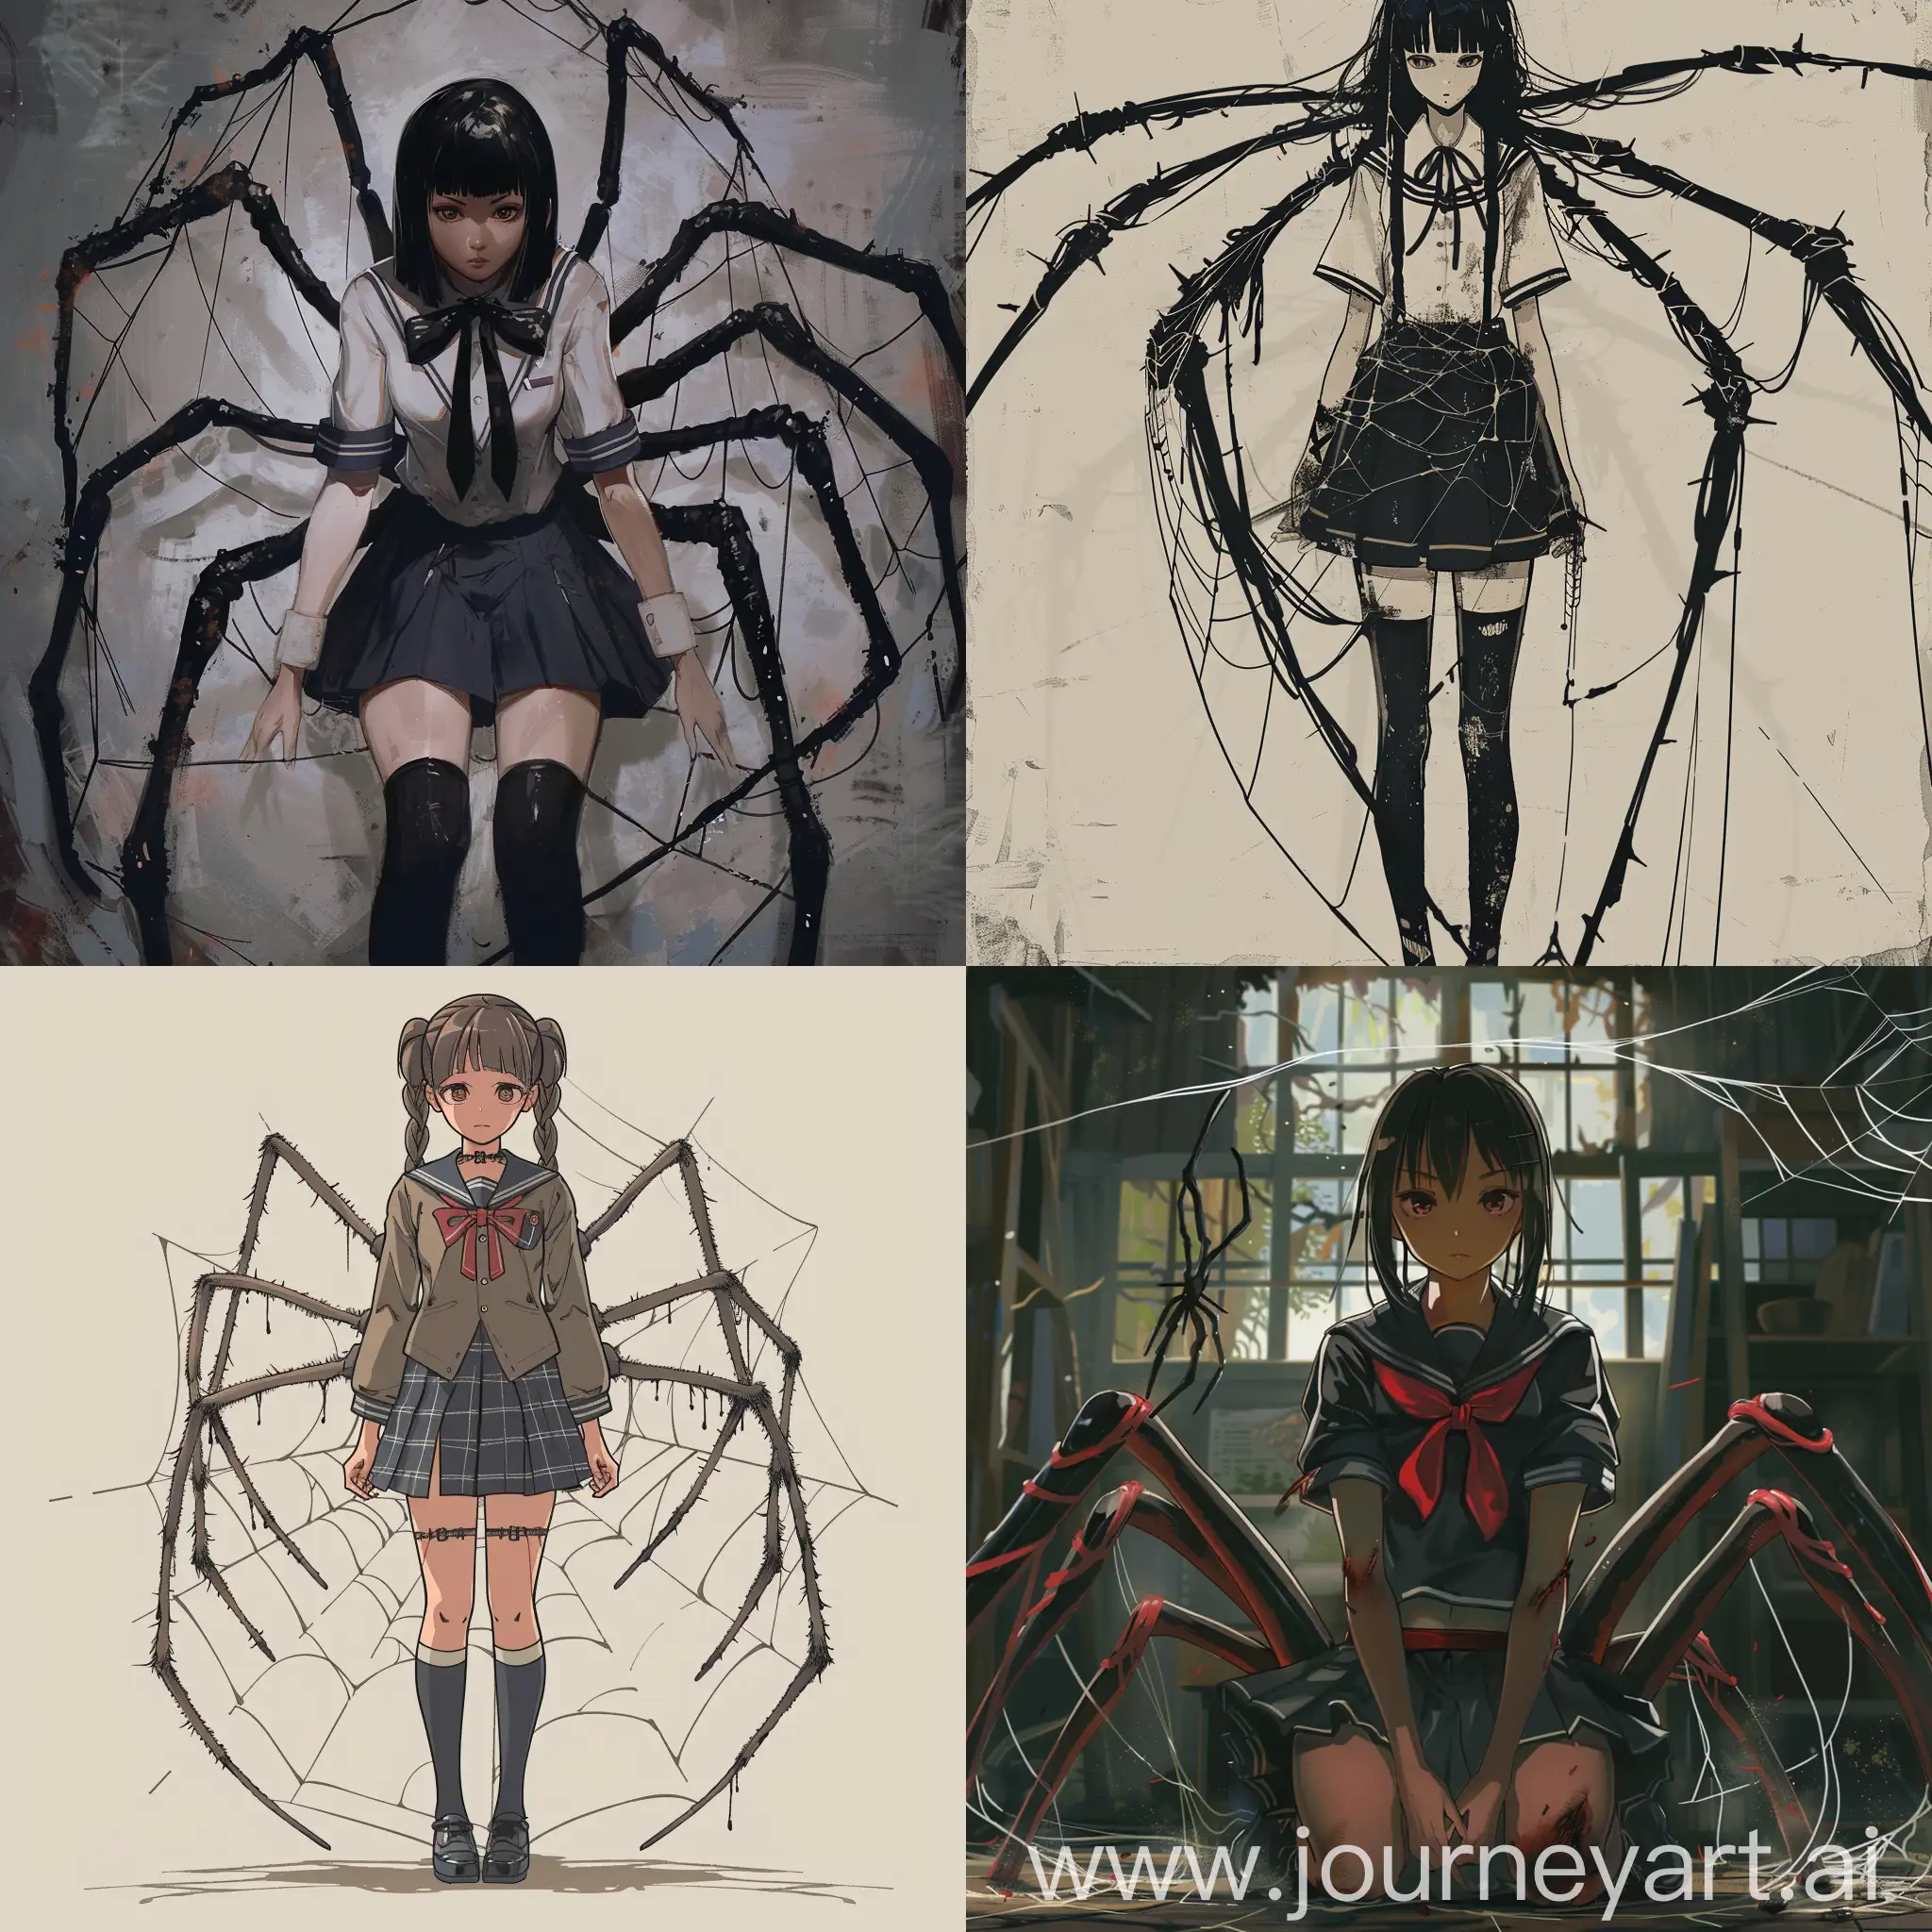 Anime-Girl-in-Japanese-School-Uniform-with-Spider-Legs-and-Web